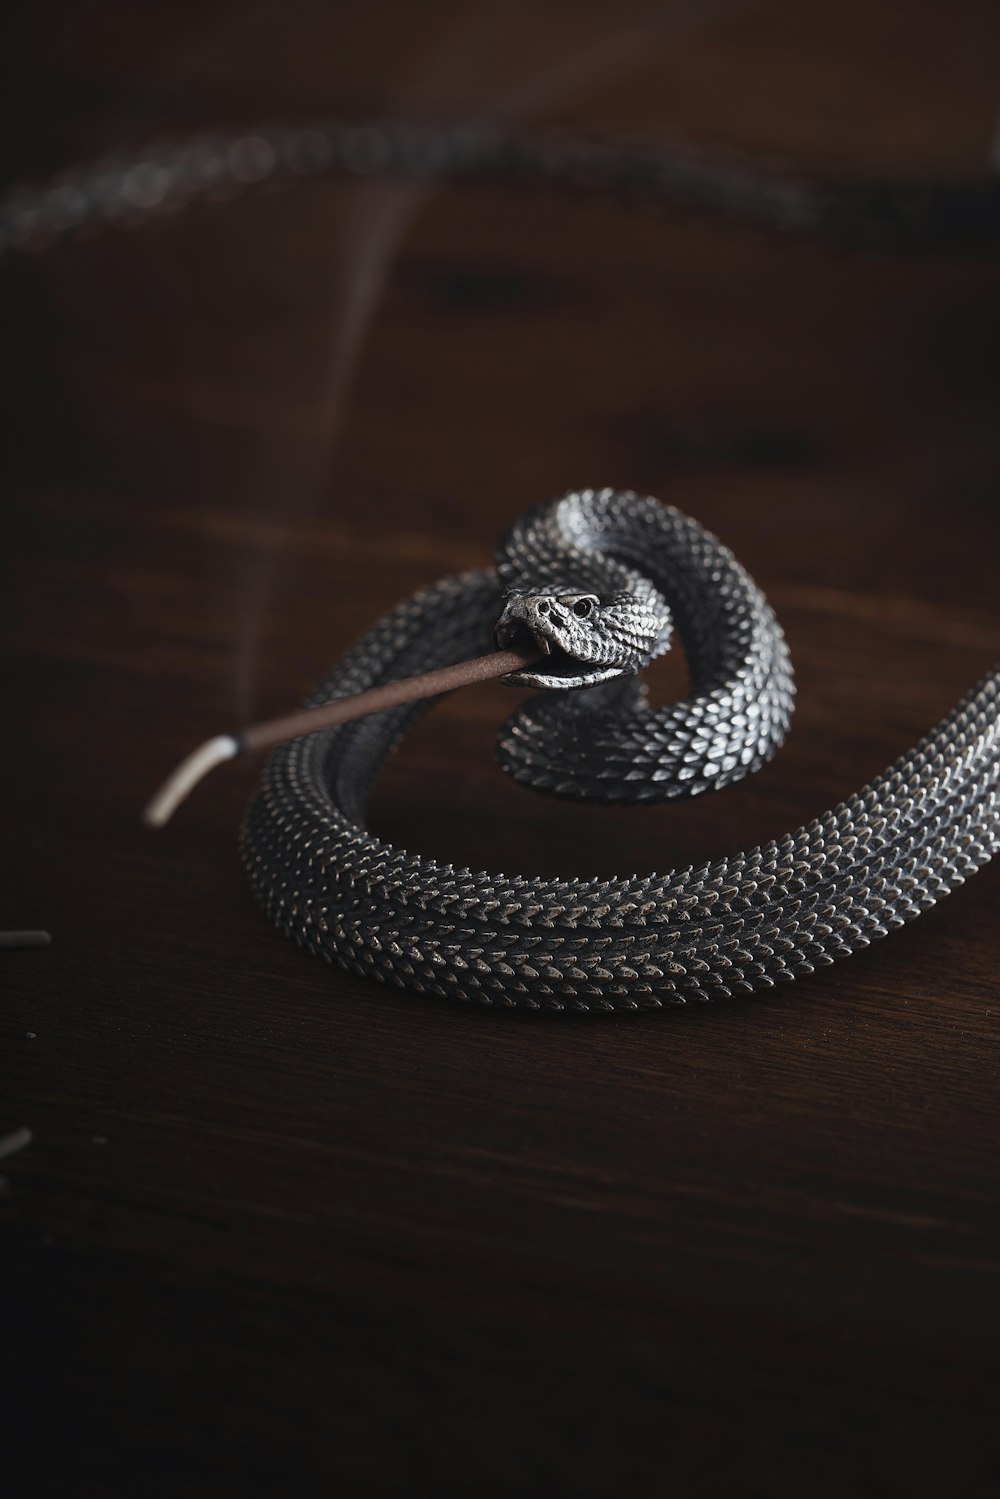 a snake on a table with a stick in its mouth